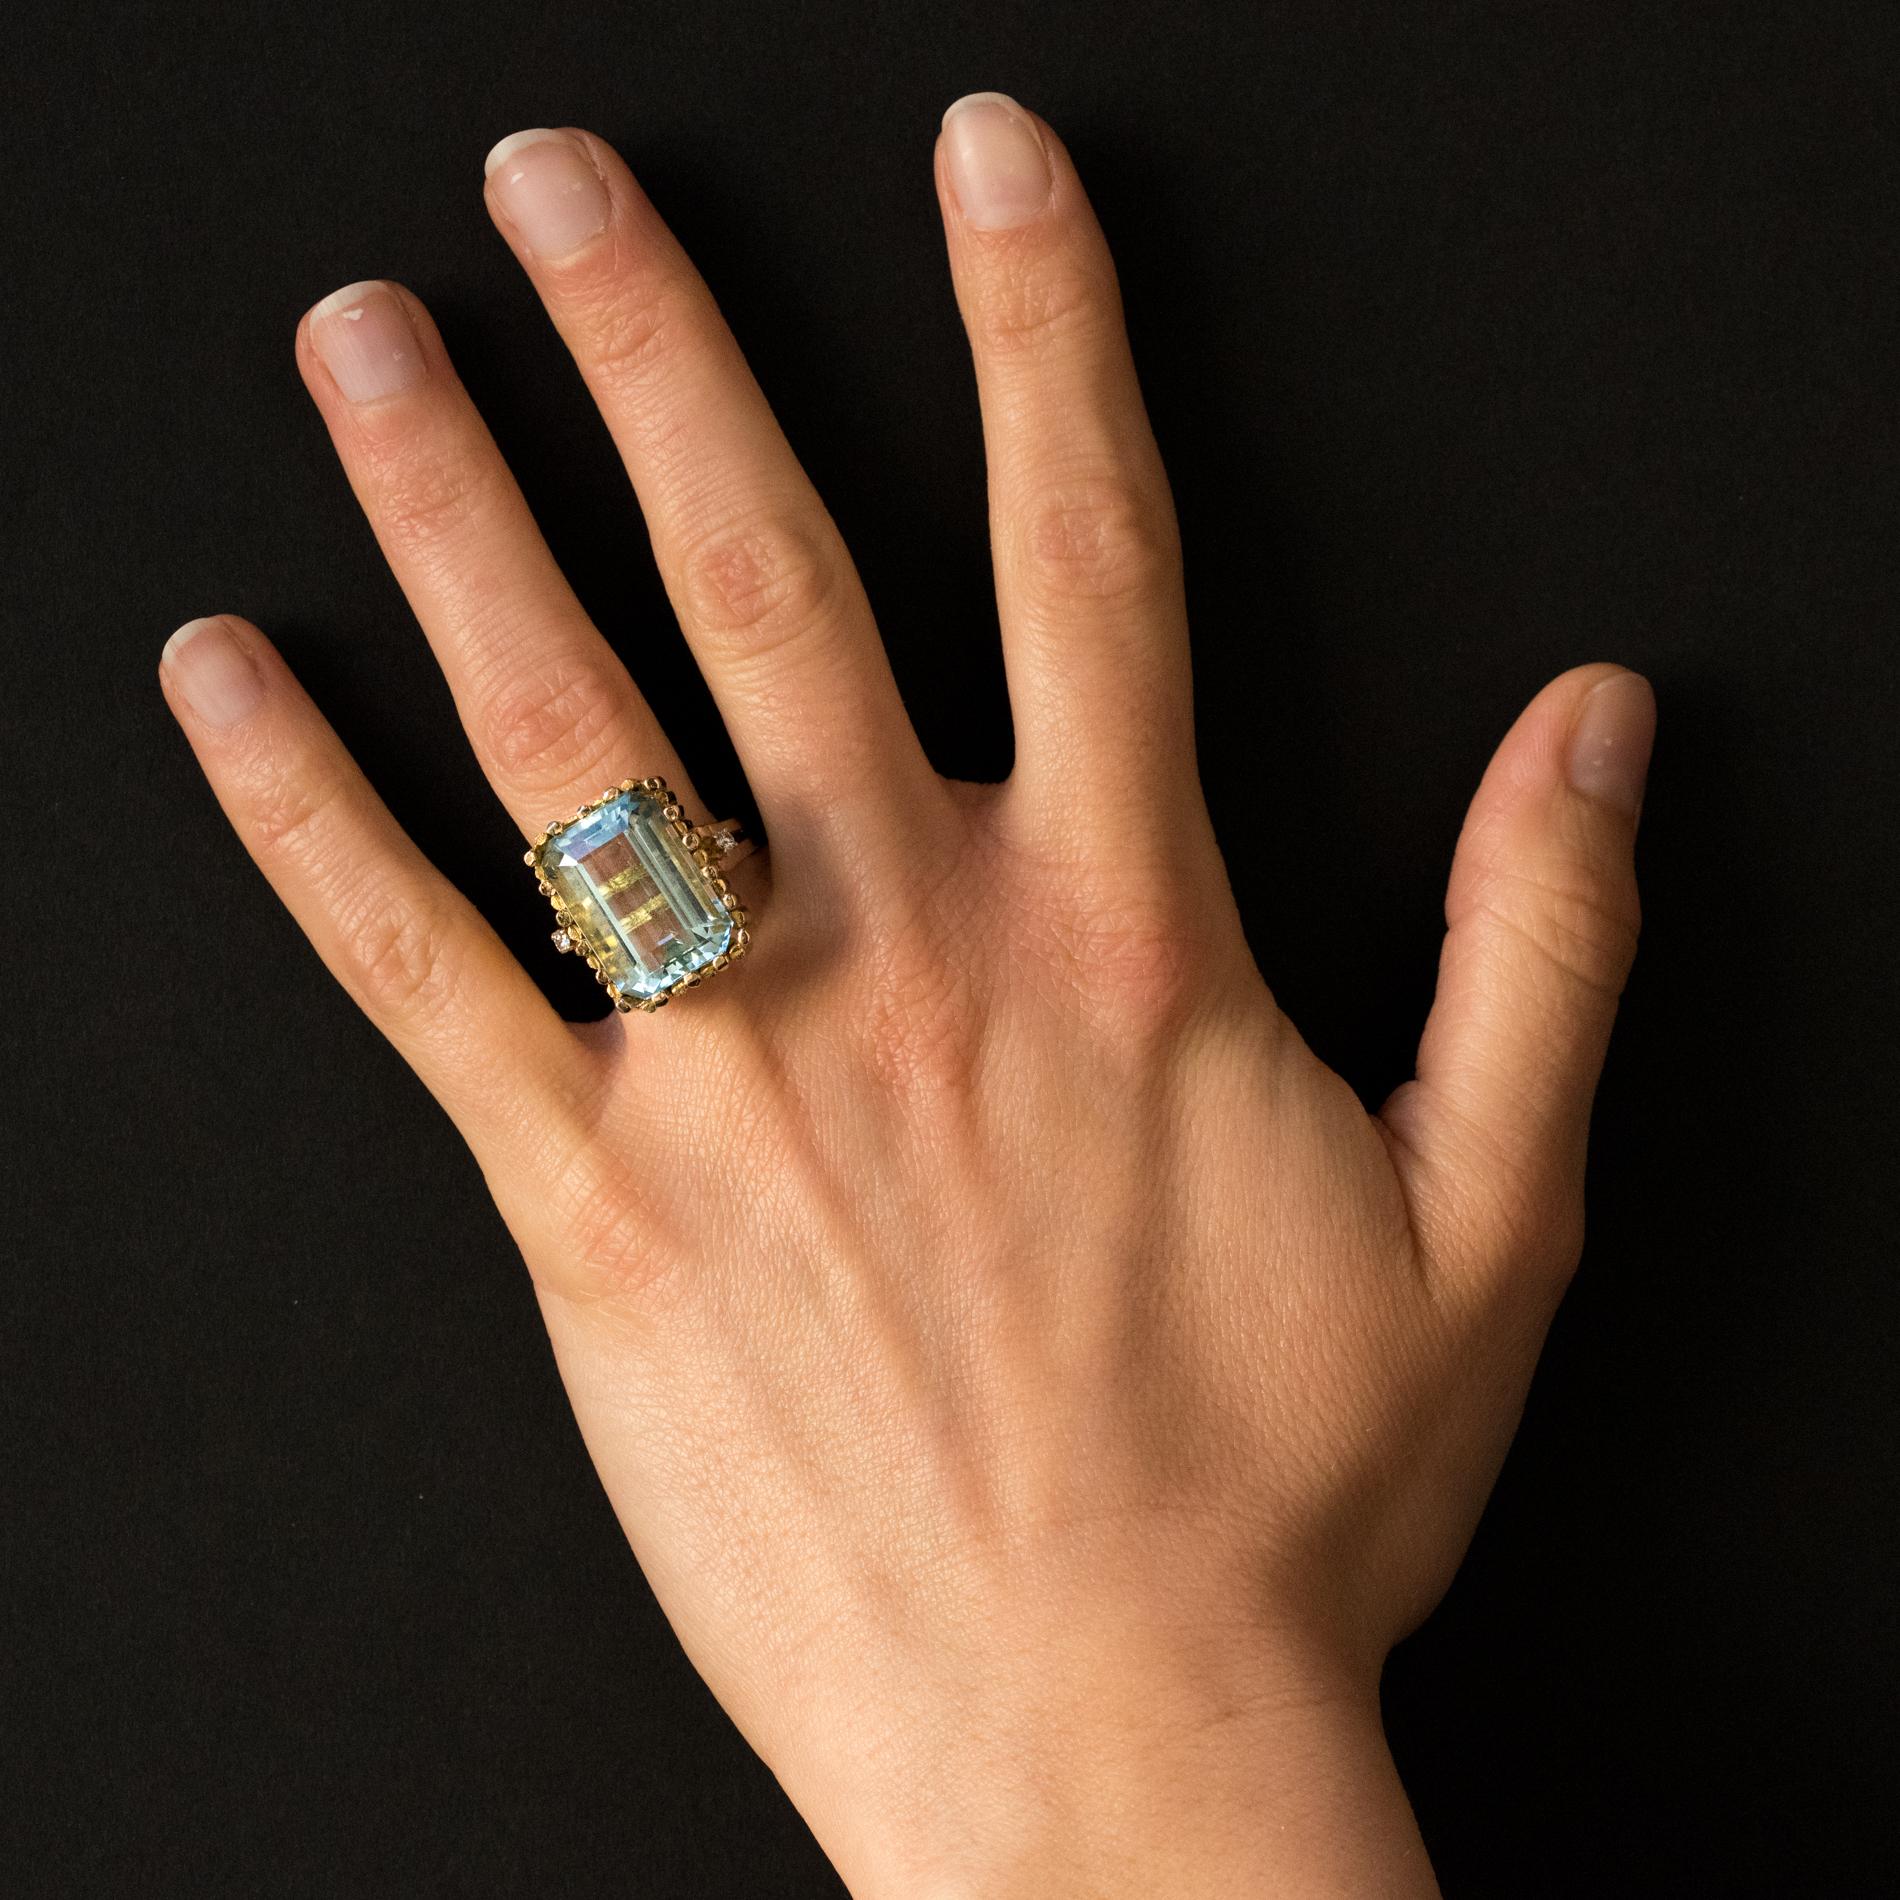 Ring in 14 Karats yellow gold, shell hallmark.
Splendid modernist ring, it is set with an emerald- cut aquamarine shouldered on both sides on the departure of the ring by a brilliant- cut diamond.
Weight of aquamarine: about 14.2 carats, total